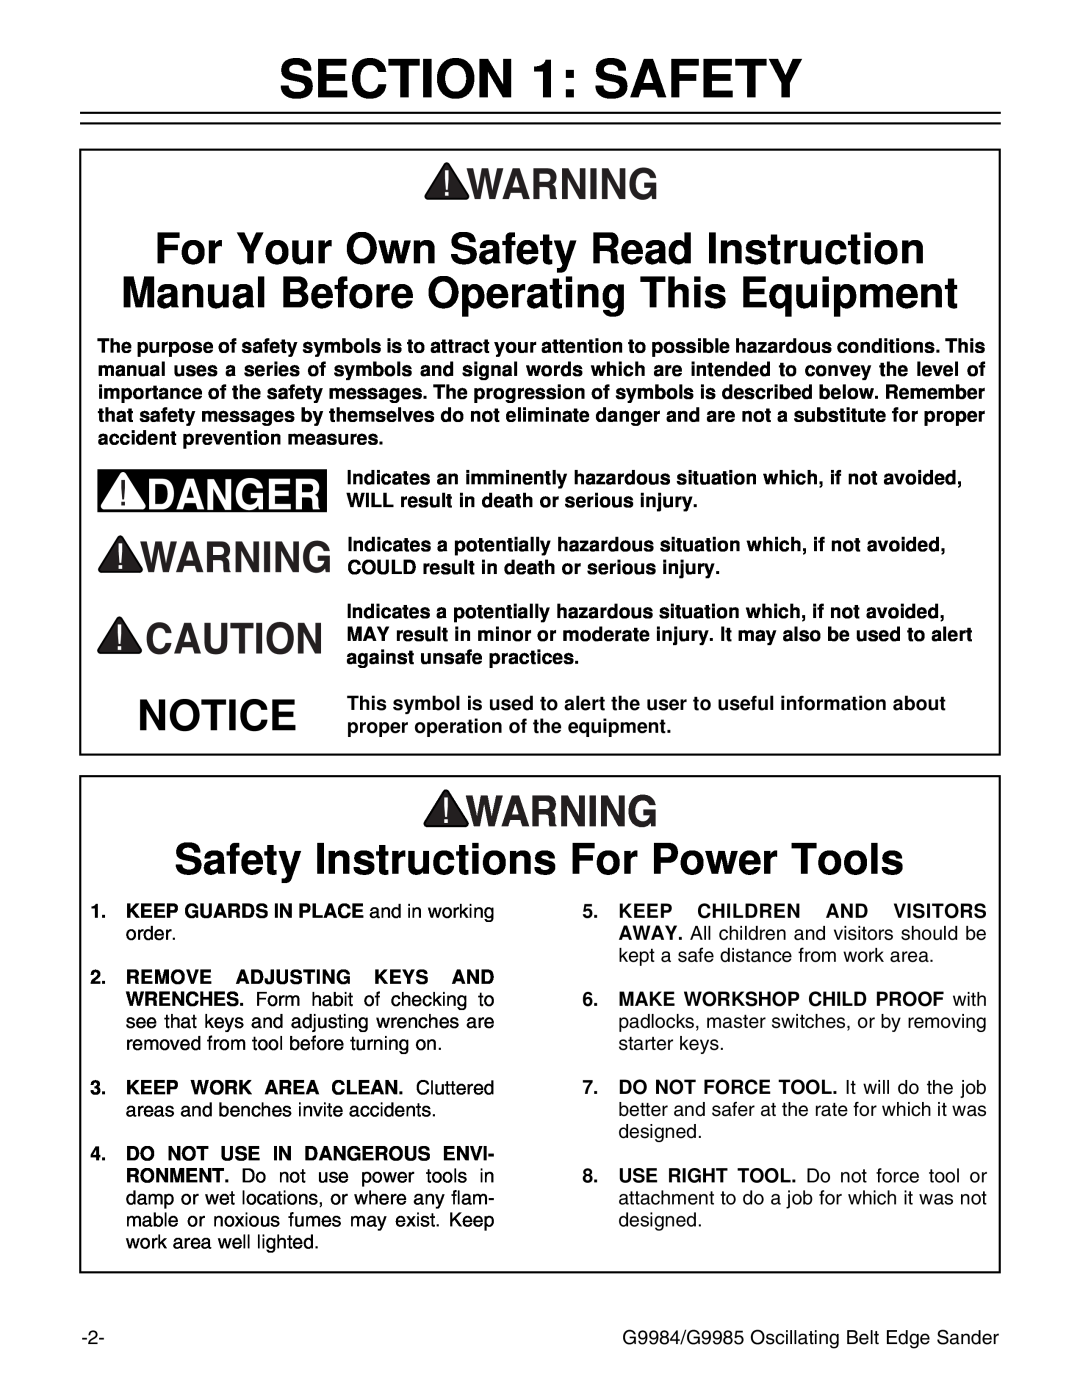 Grizzly G9984, G9985 instruction manual Safety Instructions For Power Tools 